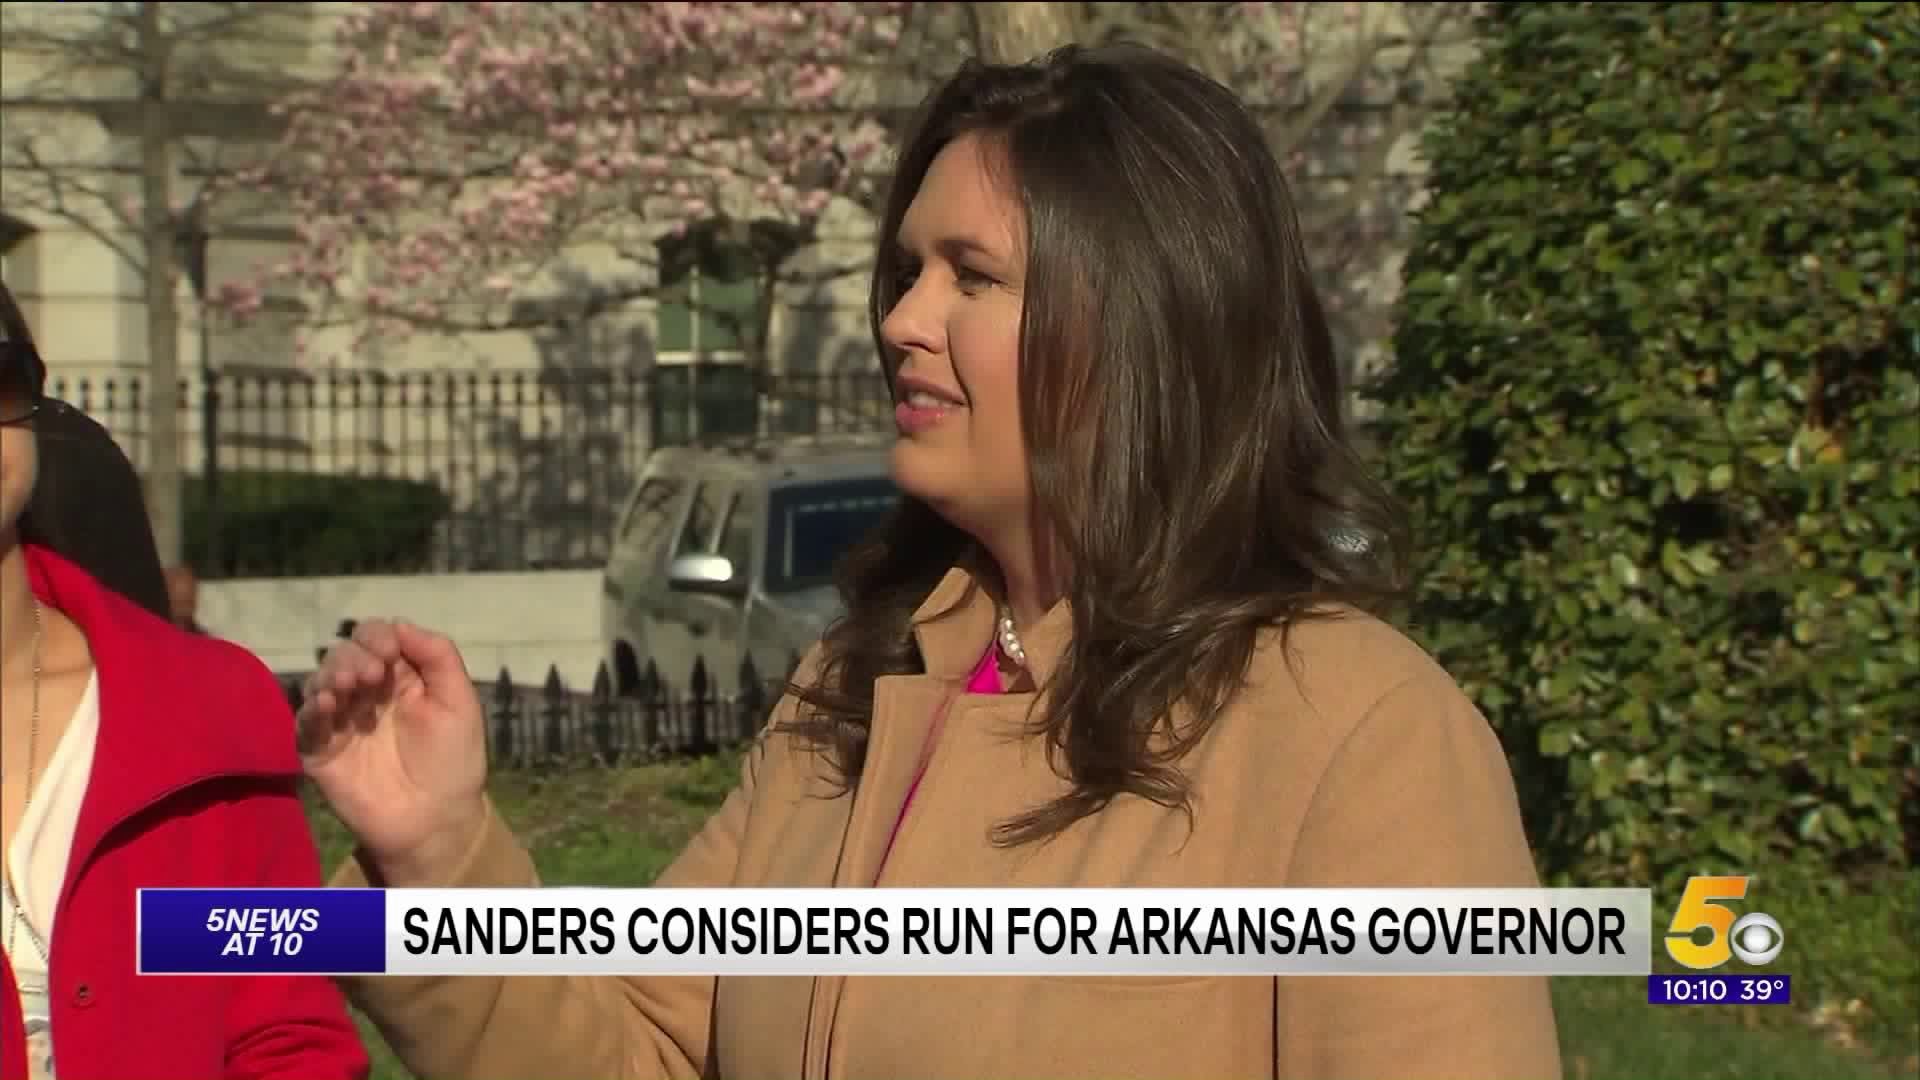 Sarah Sanders Says She Is Considering Run For Arkansas Governor